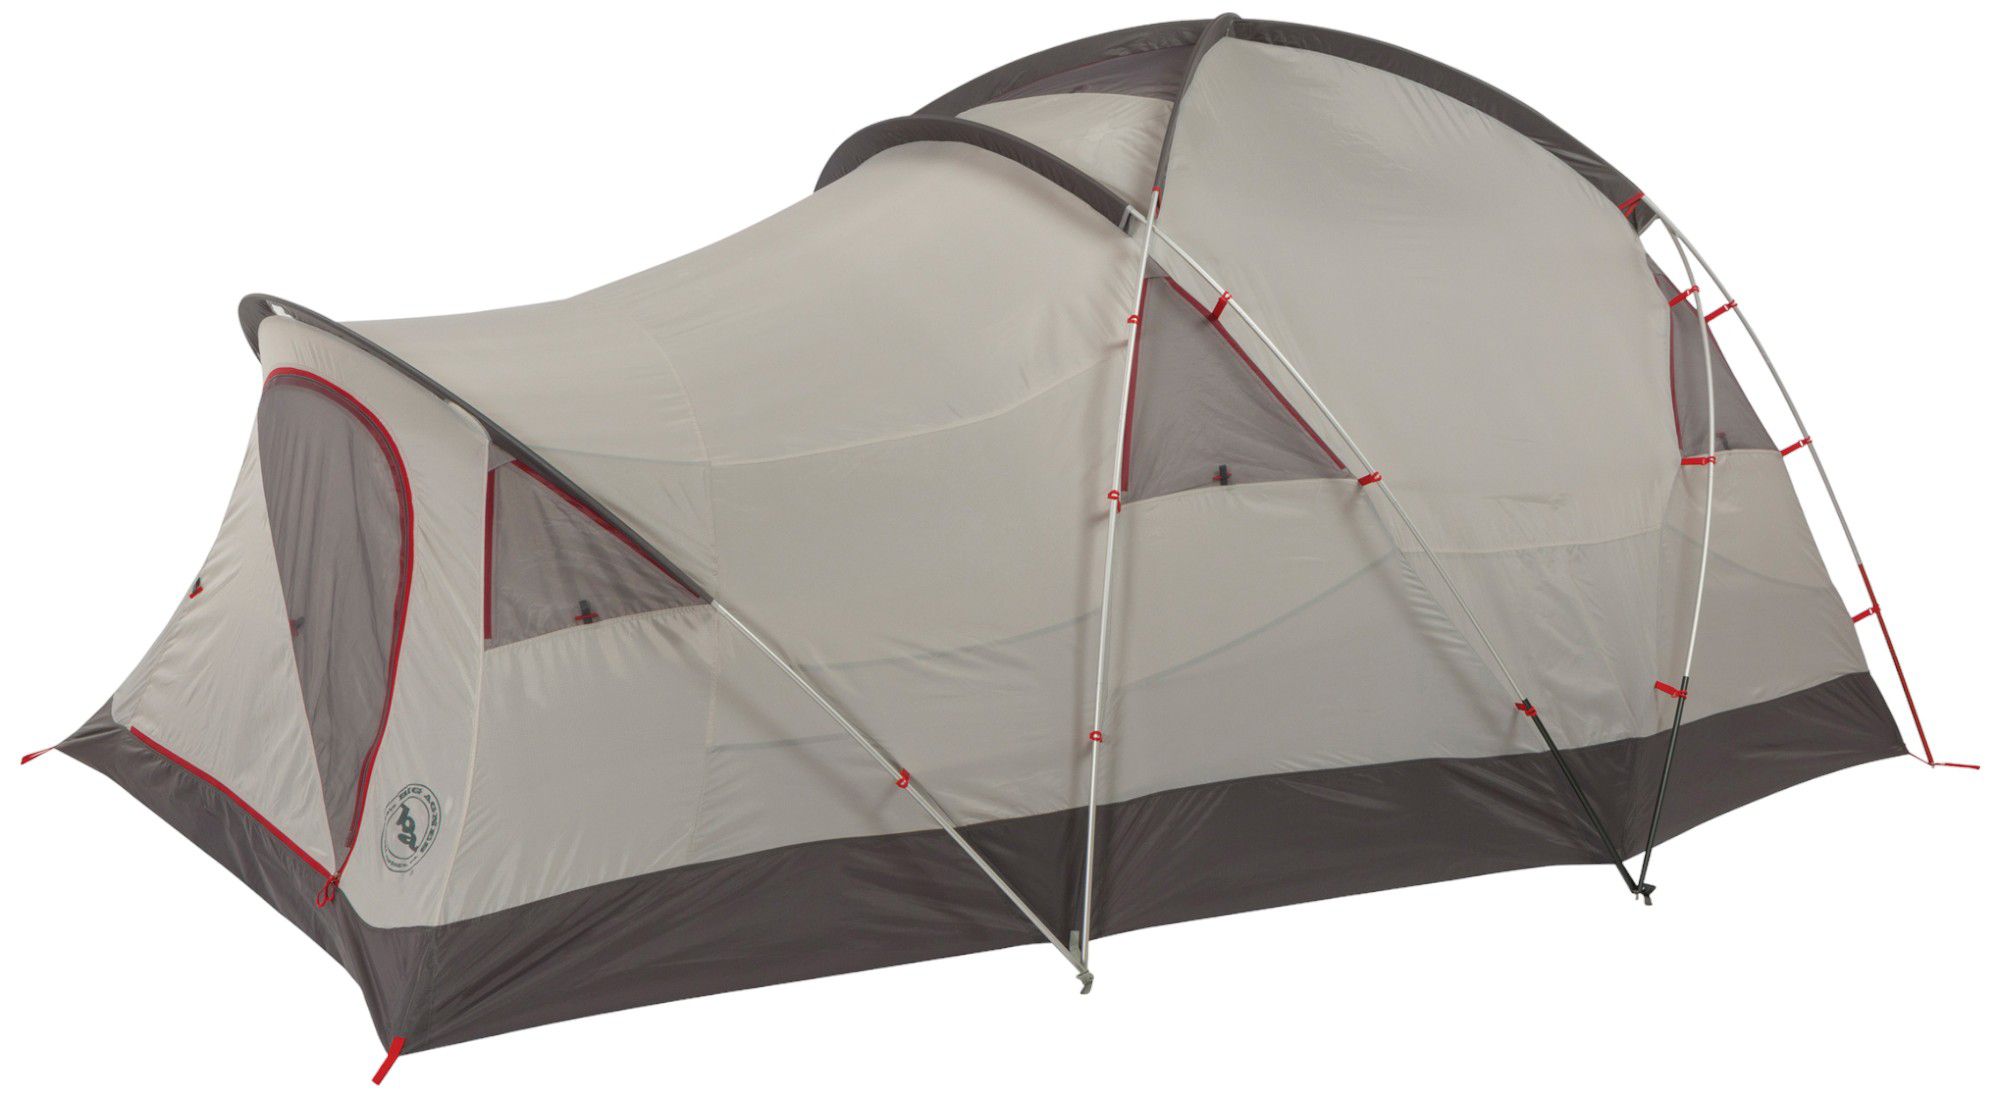 Photos - Tent Big Agnes Mad House 6 Person , Red/Gray 23TUMMMDHS6PTNTS2CAT 